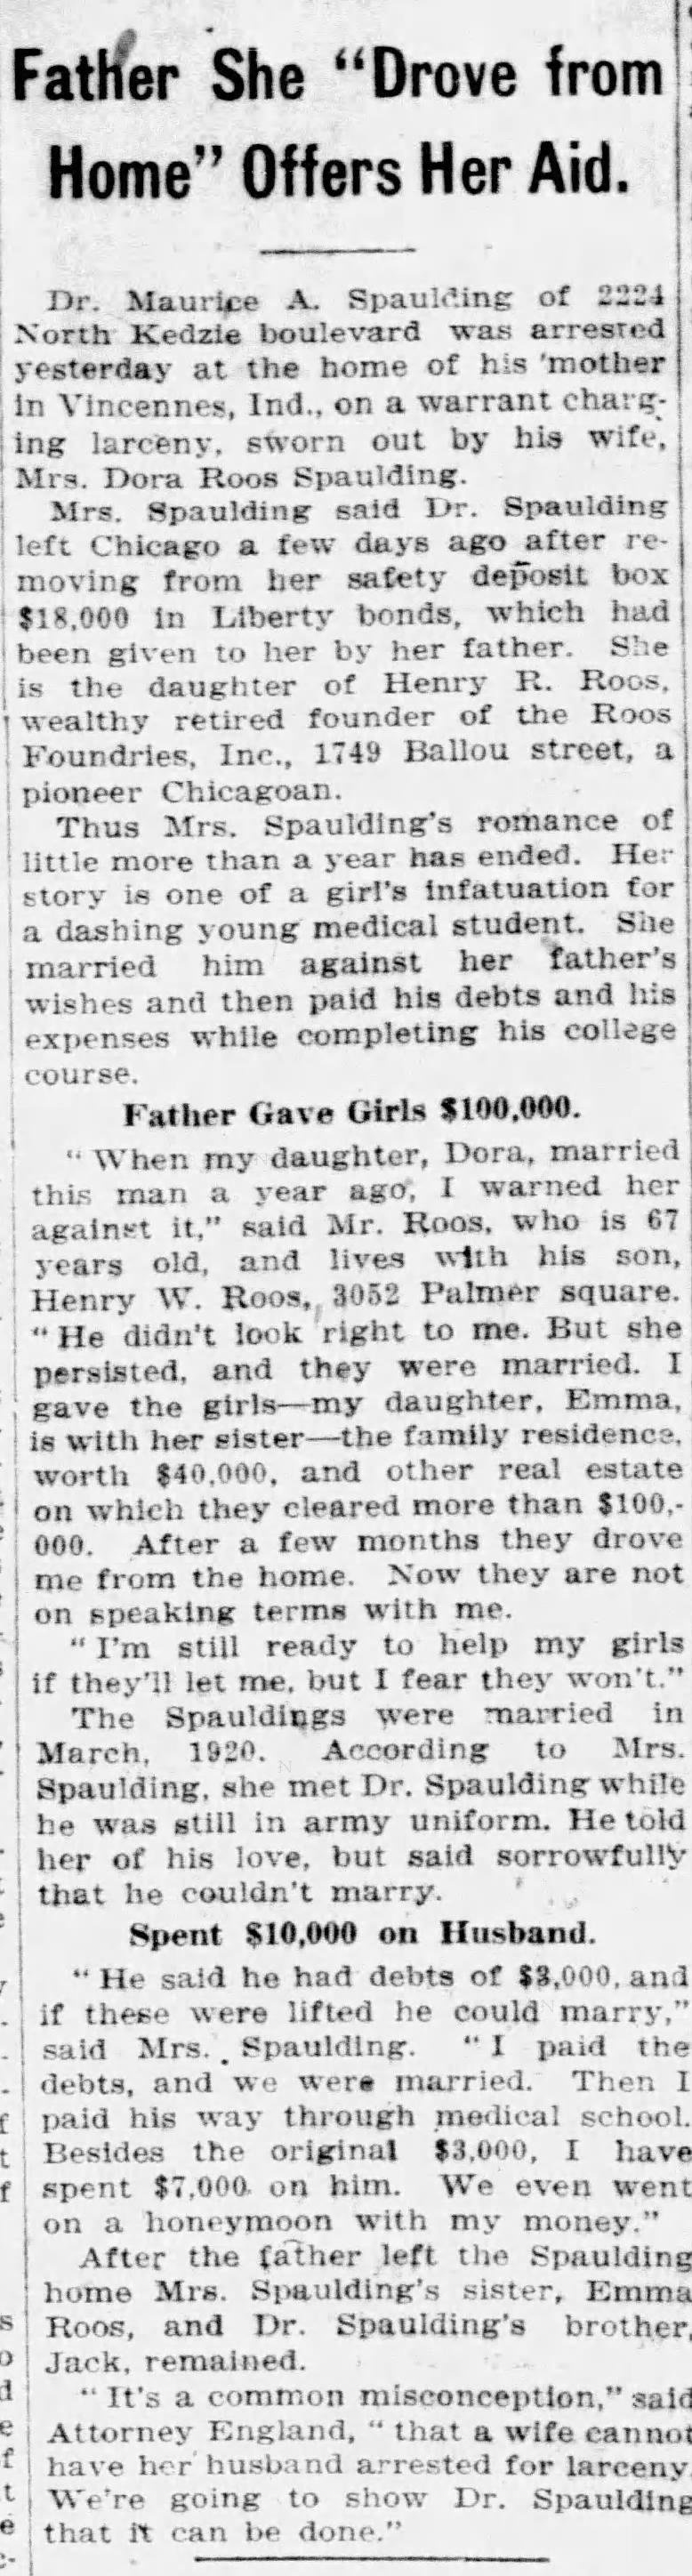 Spalding, Dora (Roos) news article, Chicago Tribune, 19 May 1921